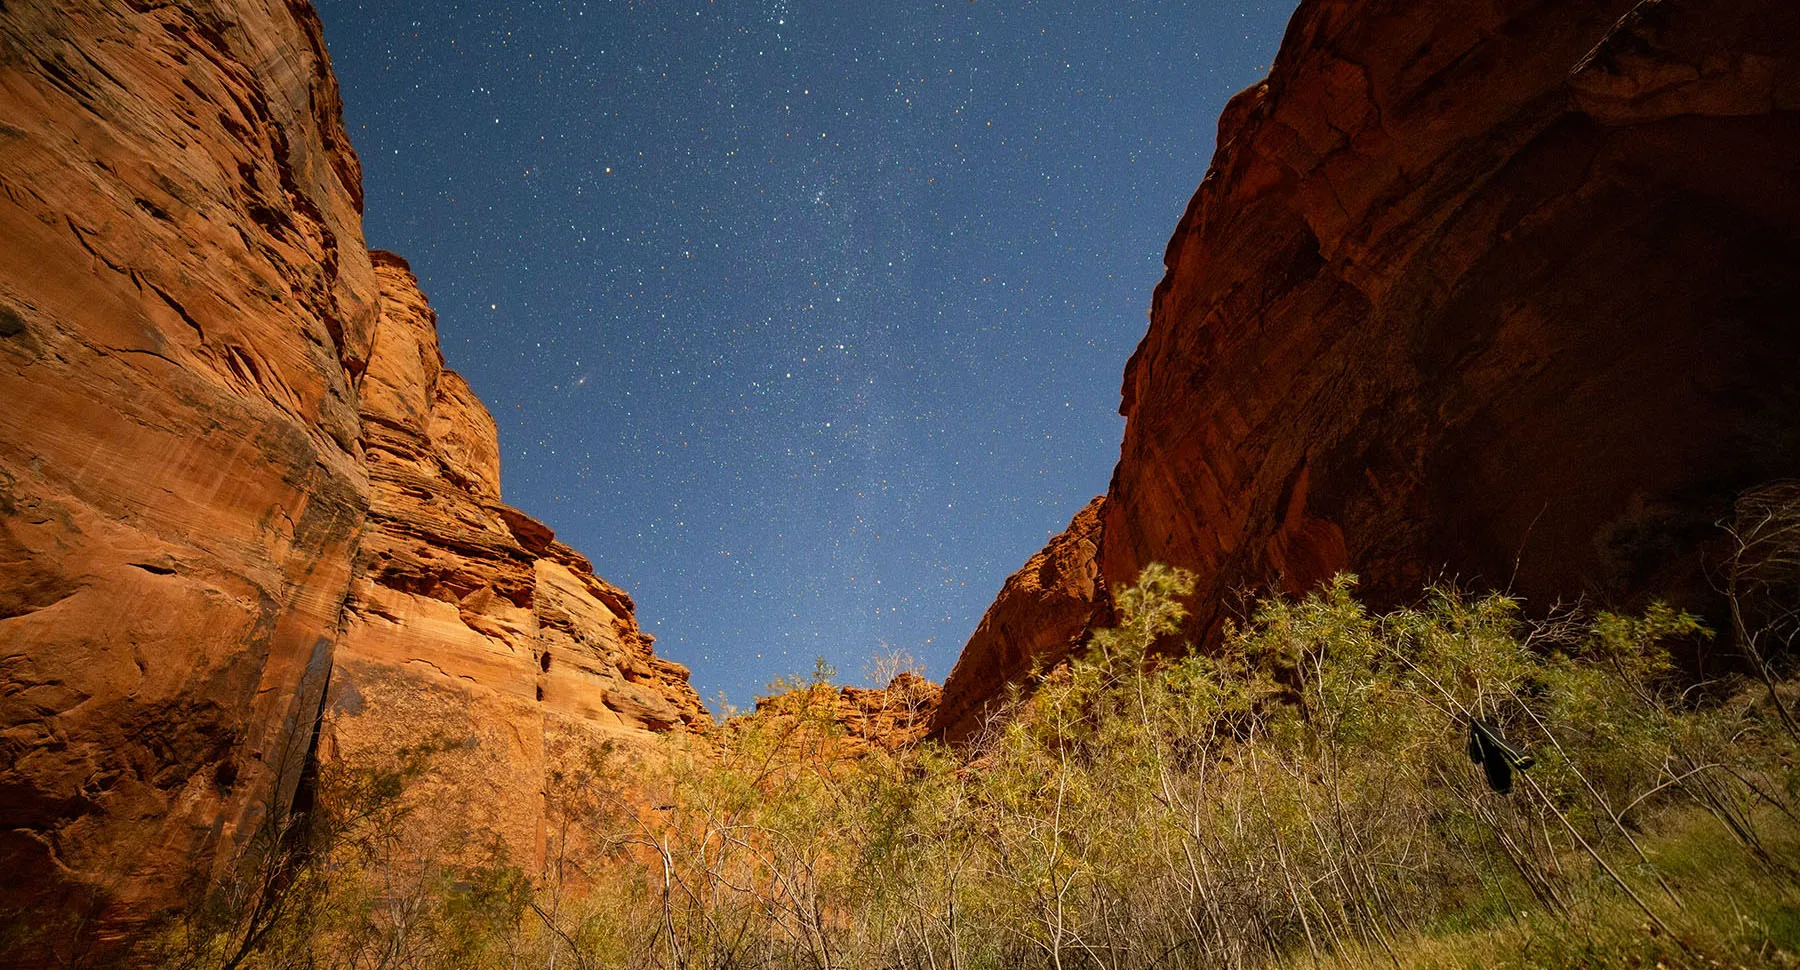 Night shot of the moonlit canyon and Milky Way from our campsite